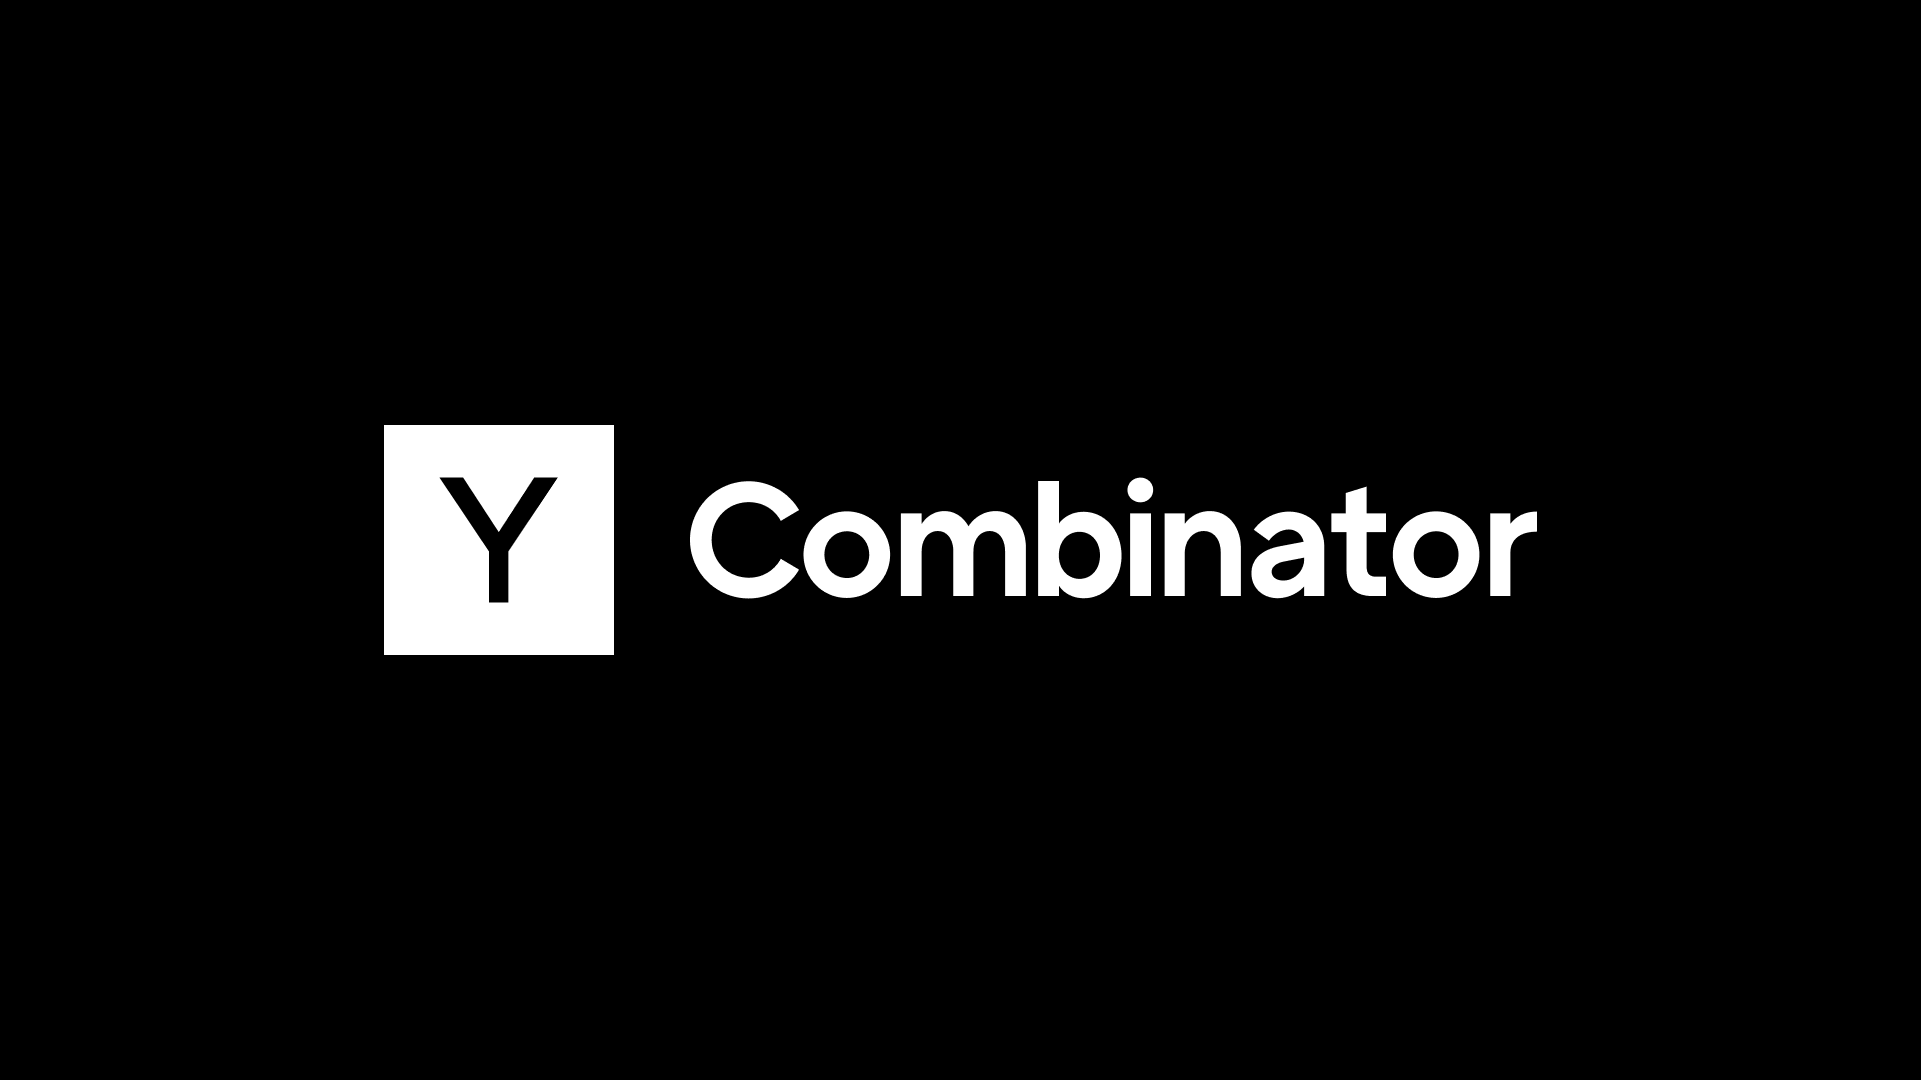 Y Combinator's Summer 2023 Cybersecurity, Privacy, and Trust Startups